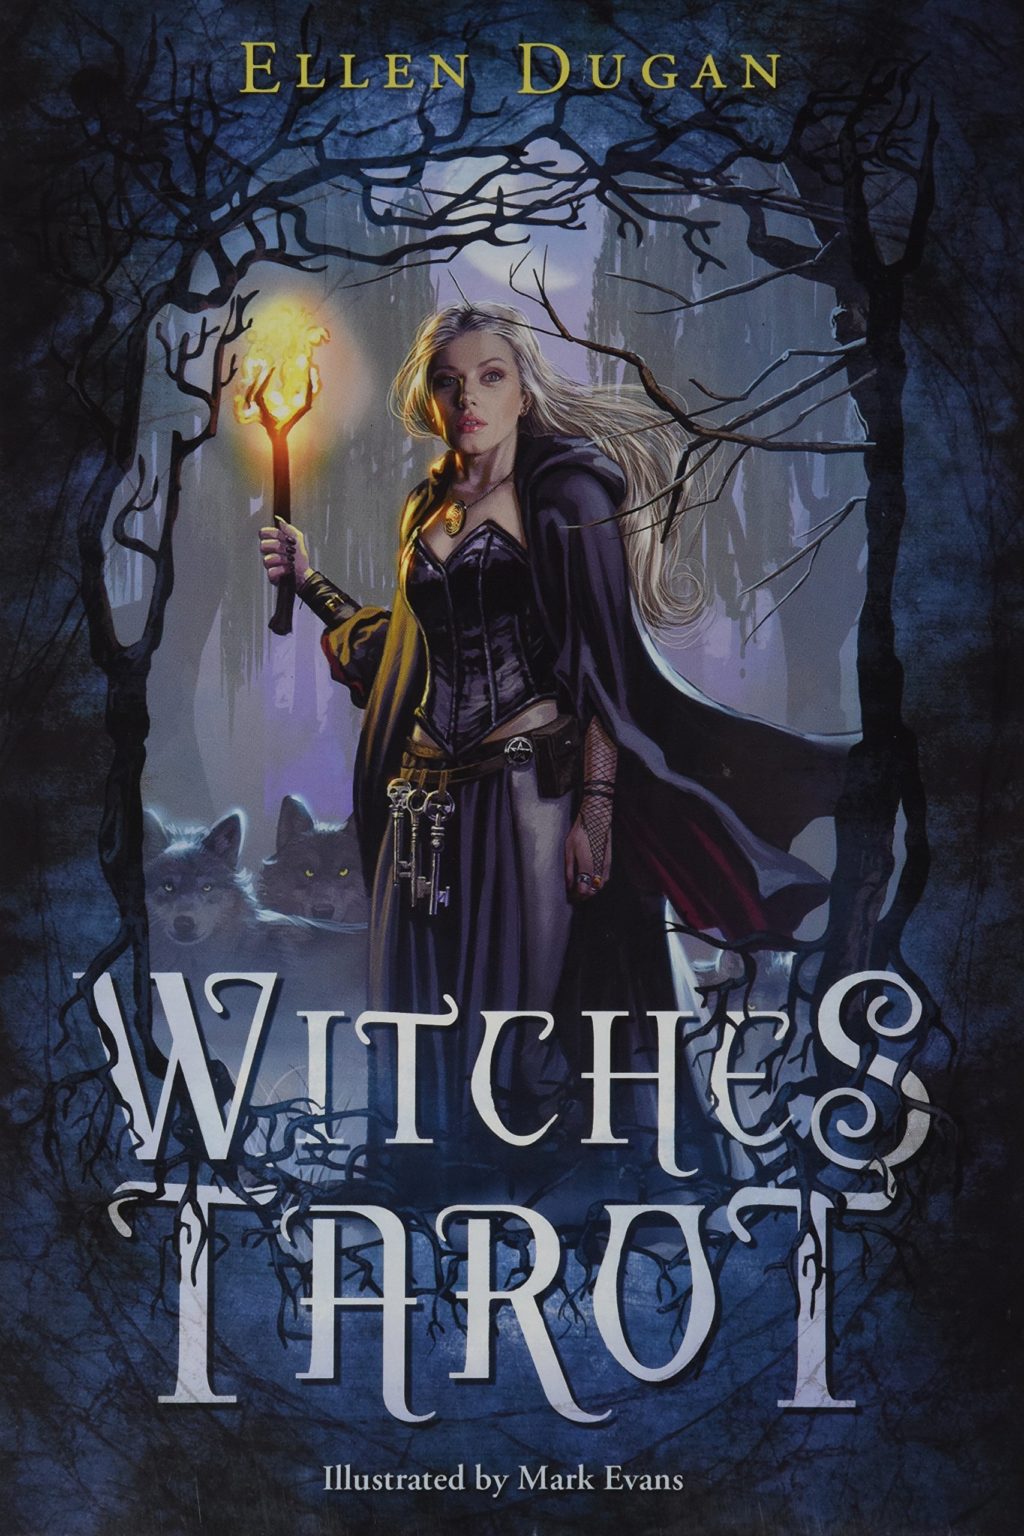 Tarot of the witches